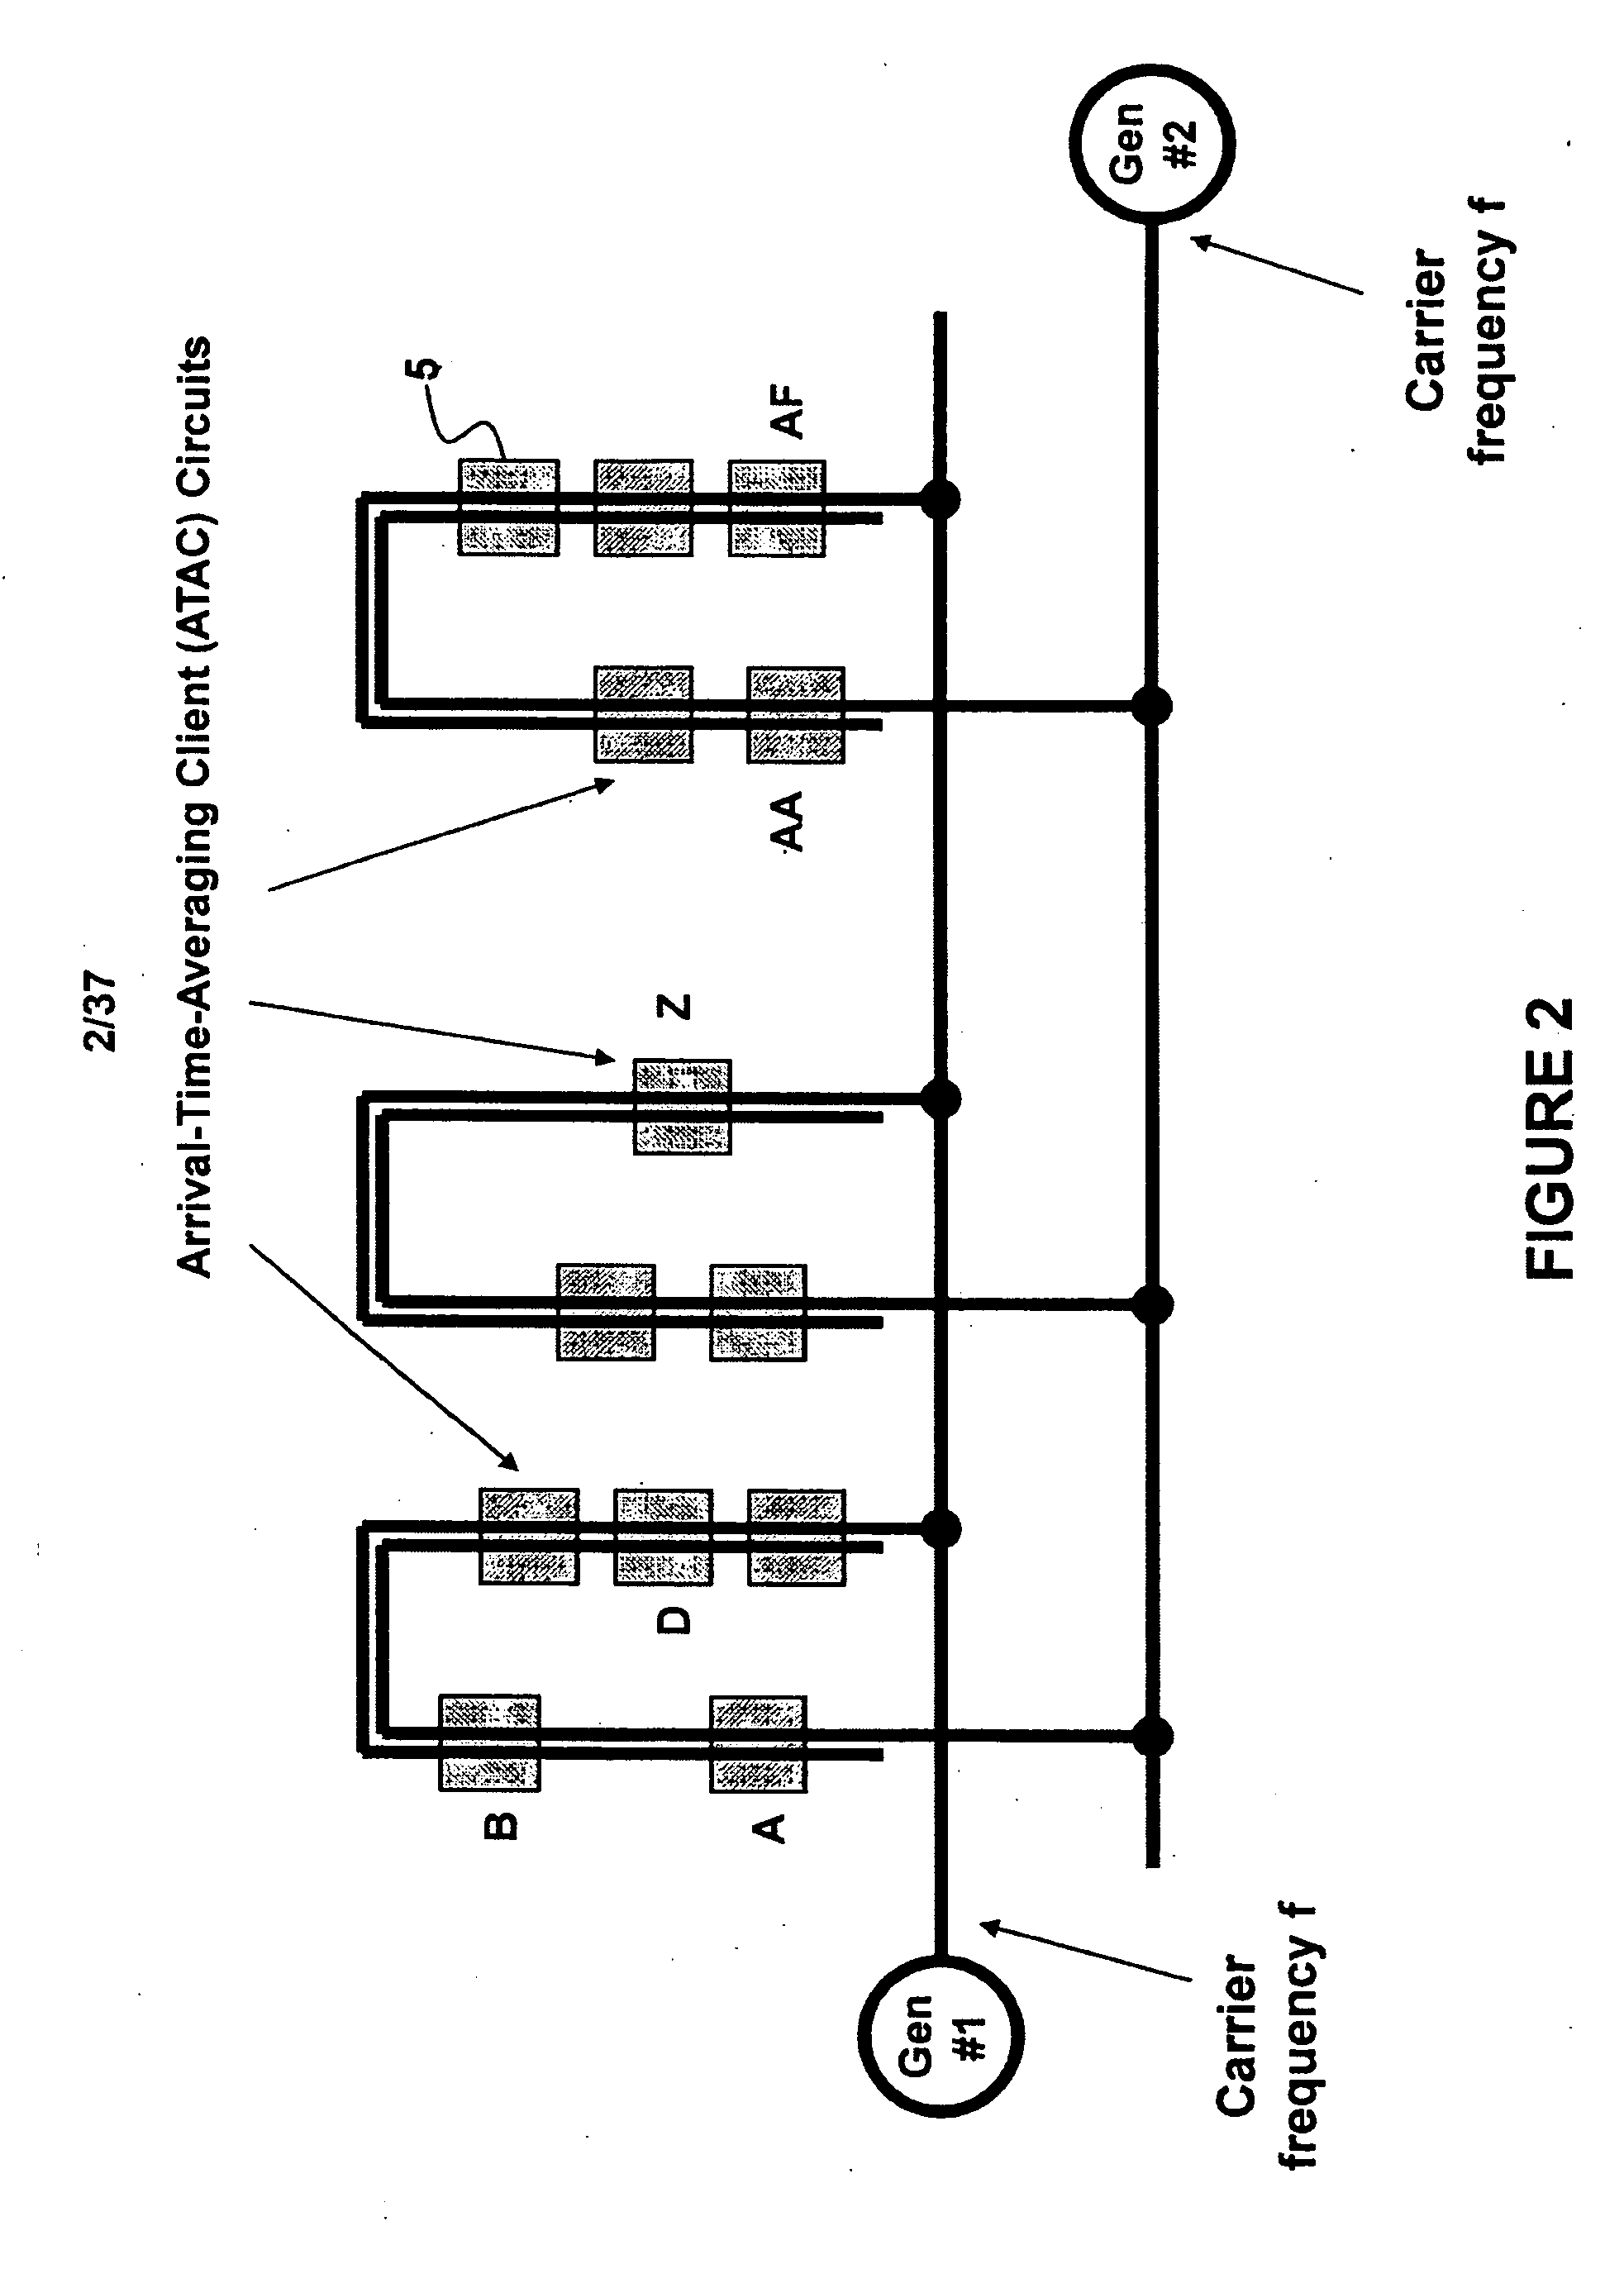 Method and System for Multi-Point Signal Generation with Phase Synchronized Local Carriers